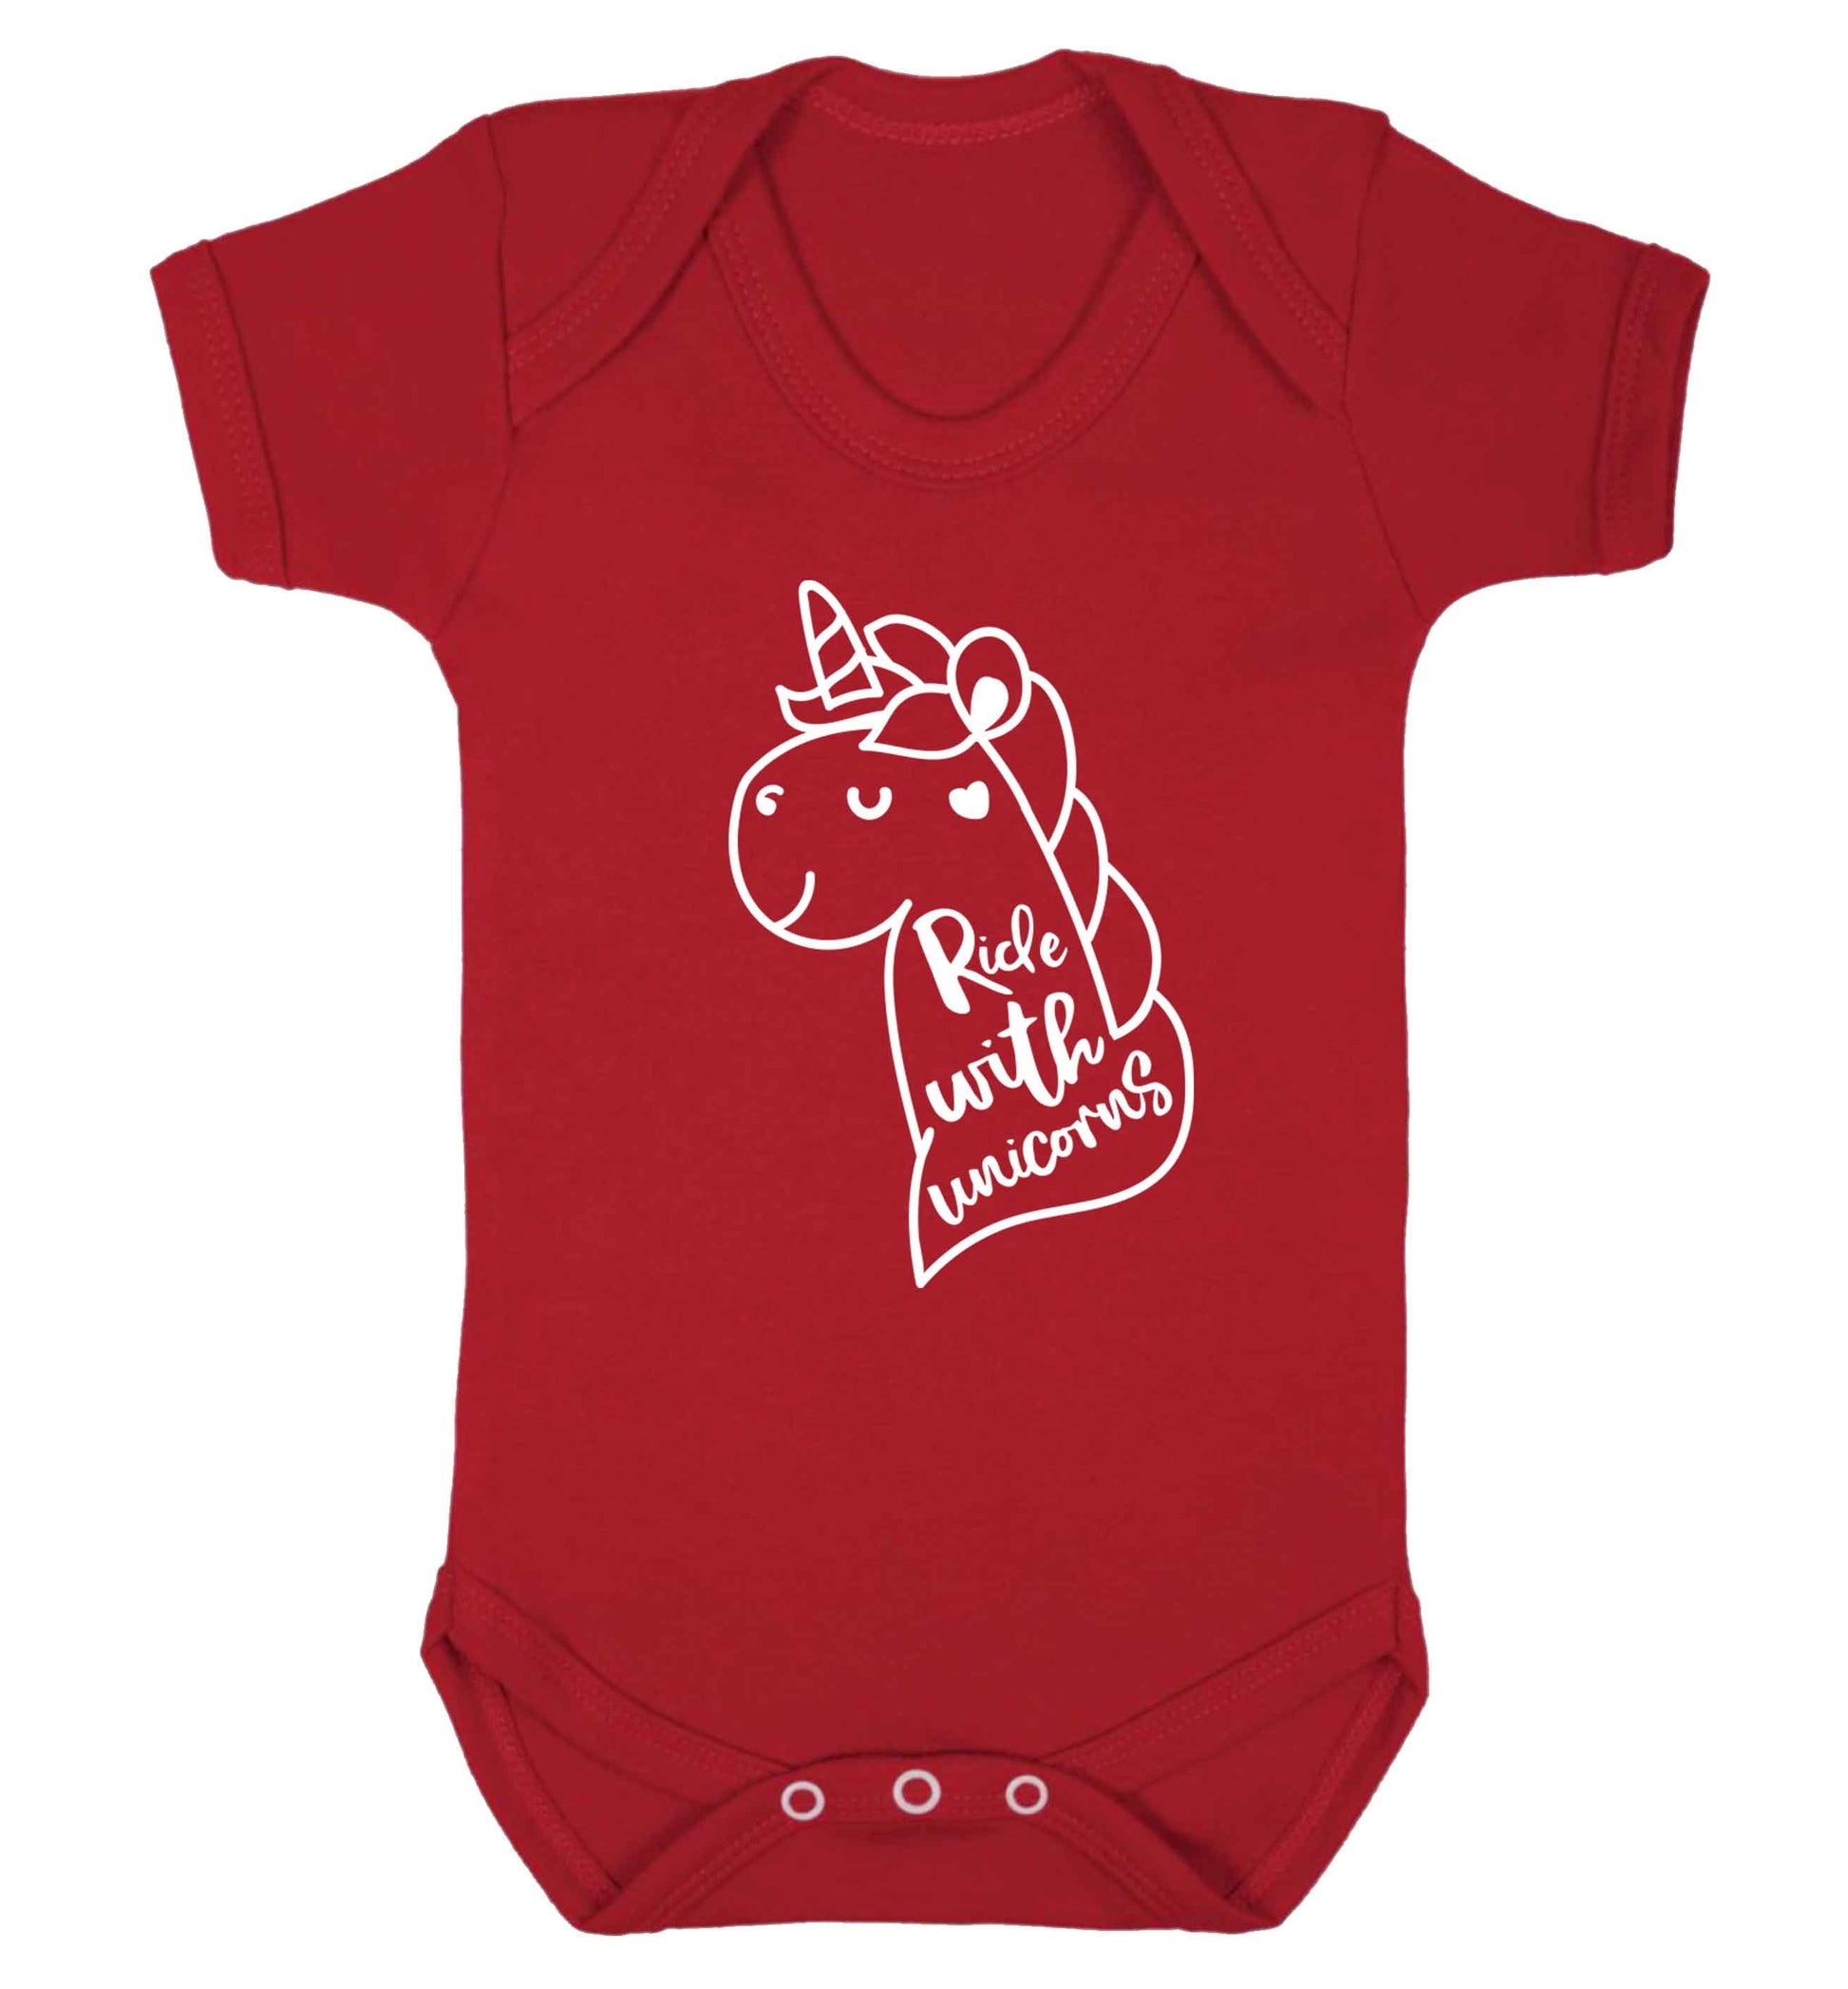 Ride with unicorns Baby Vest red 18-24 months